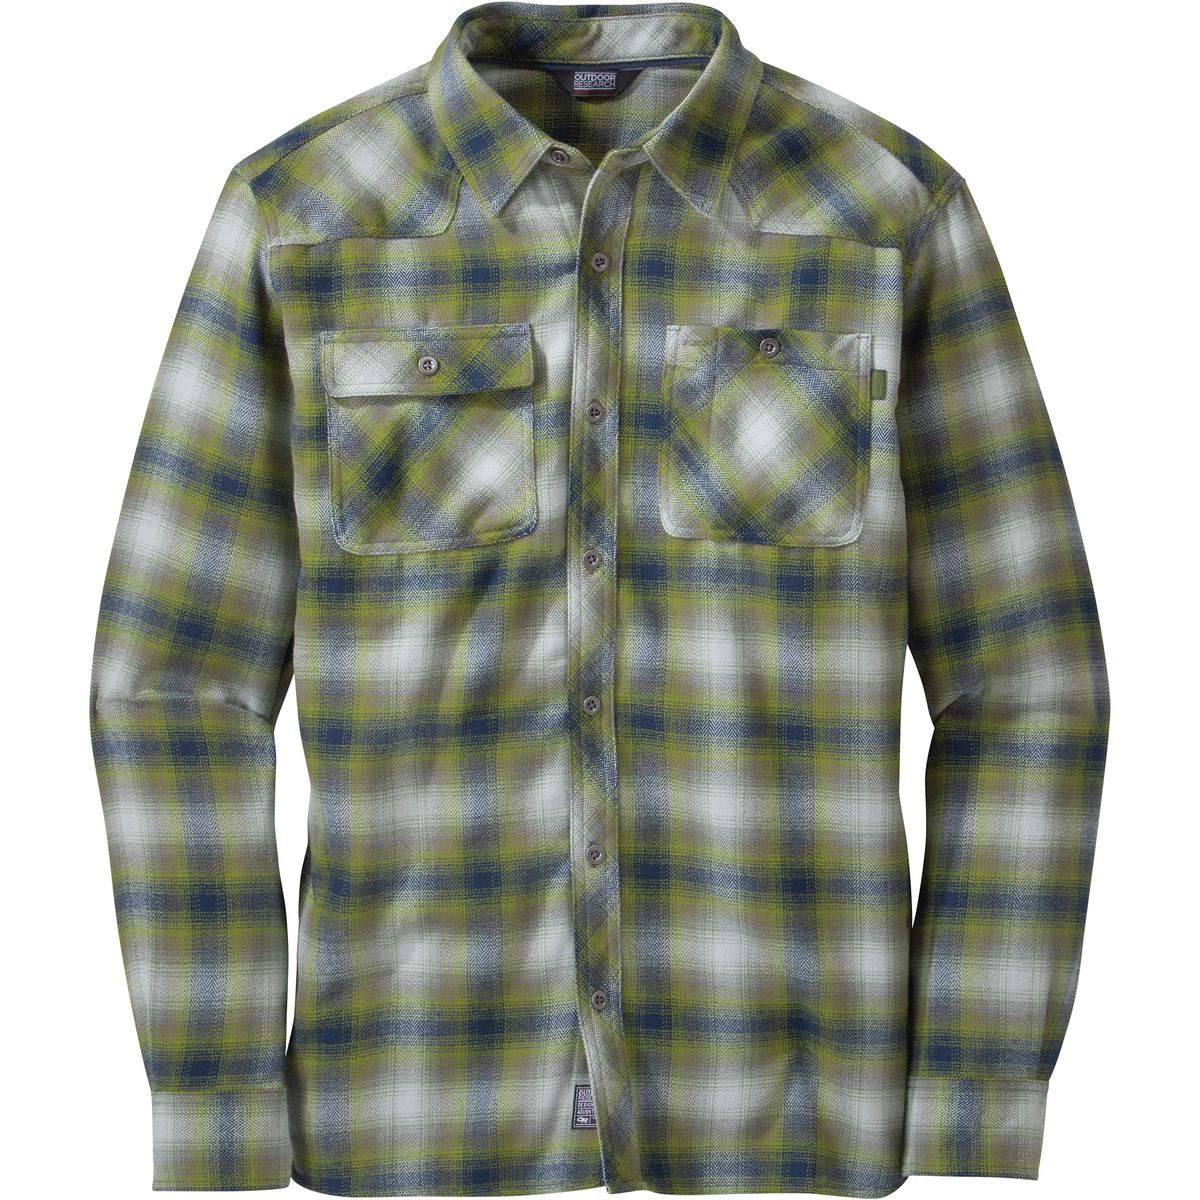 Outdoor Research Feedback Flannel Shirt - Men's | Backcountry.com